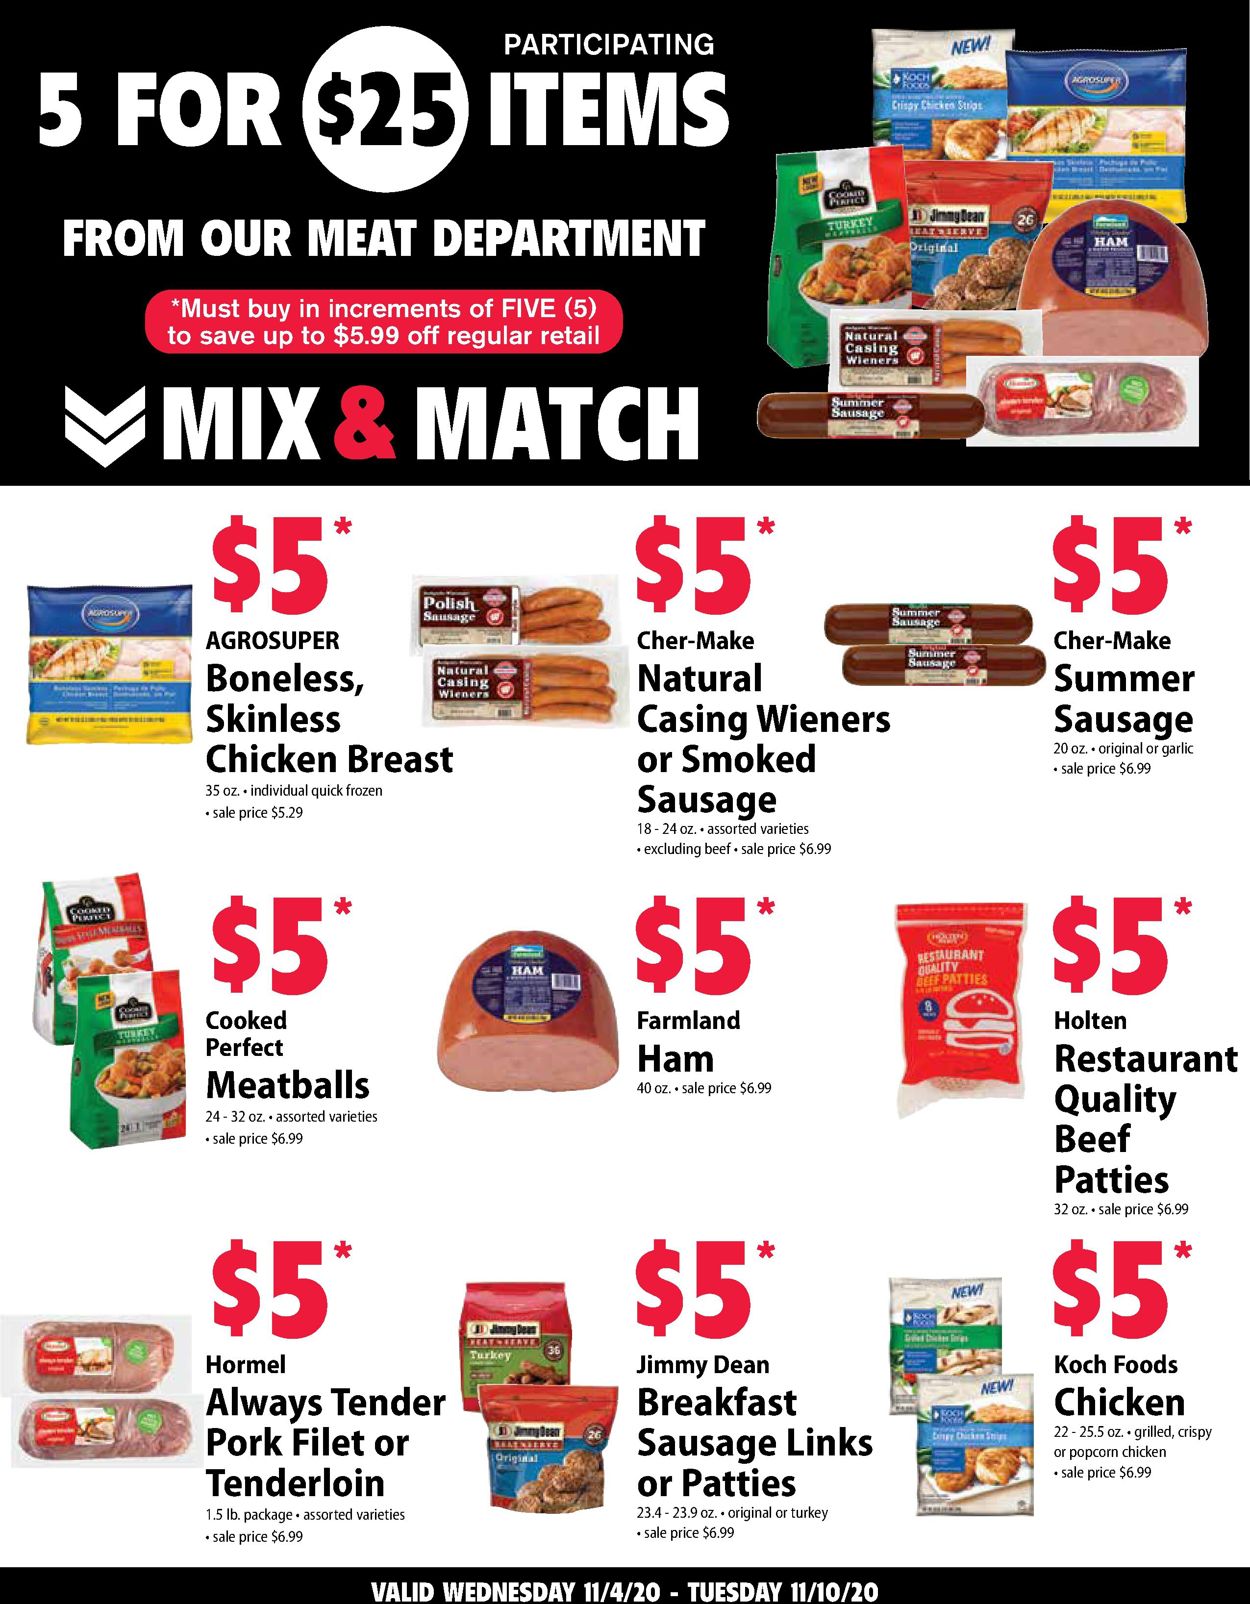 Festival Foods Current weekly ad 10/28 - 11/10/2020 [8] - frequent-ads.com